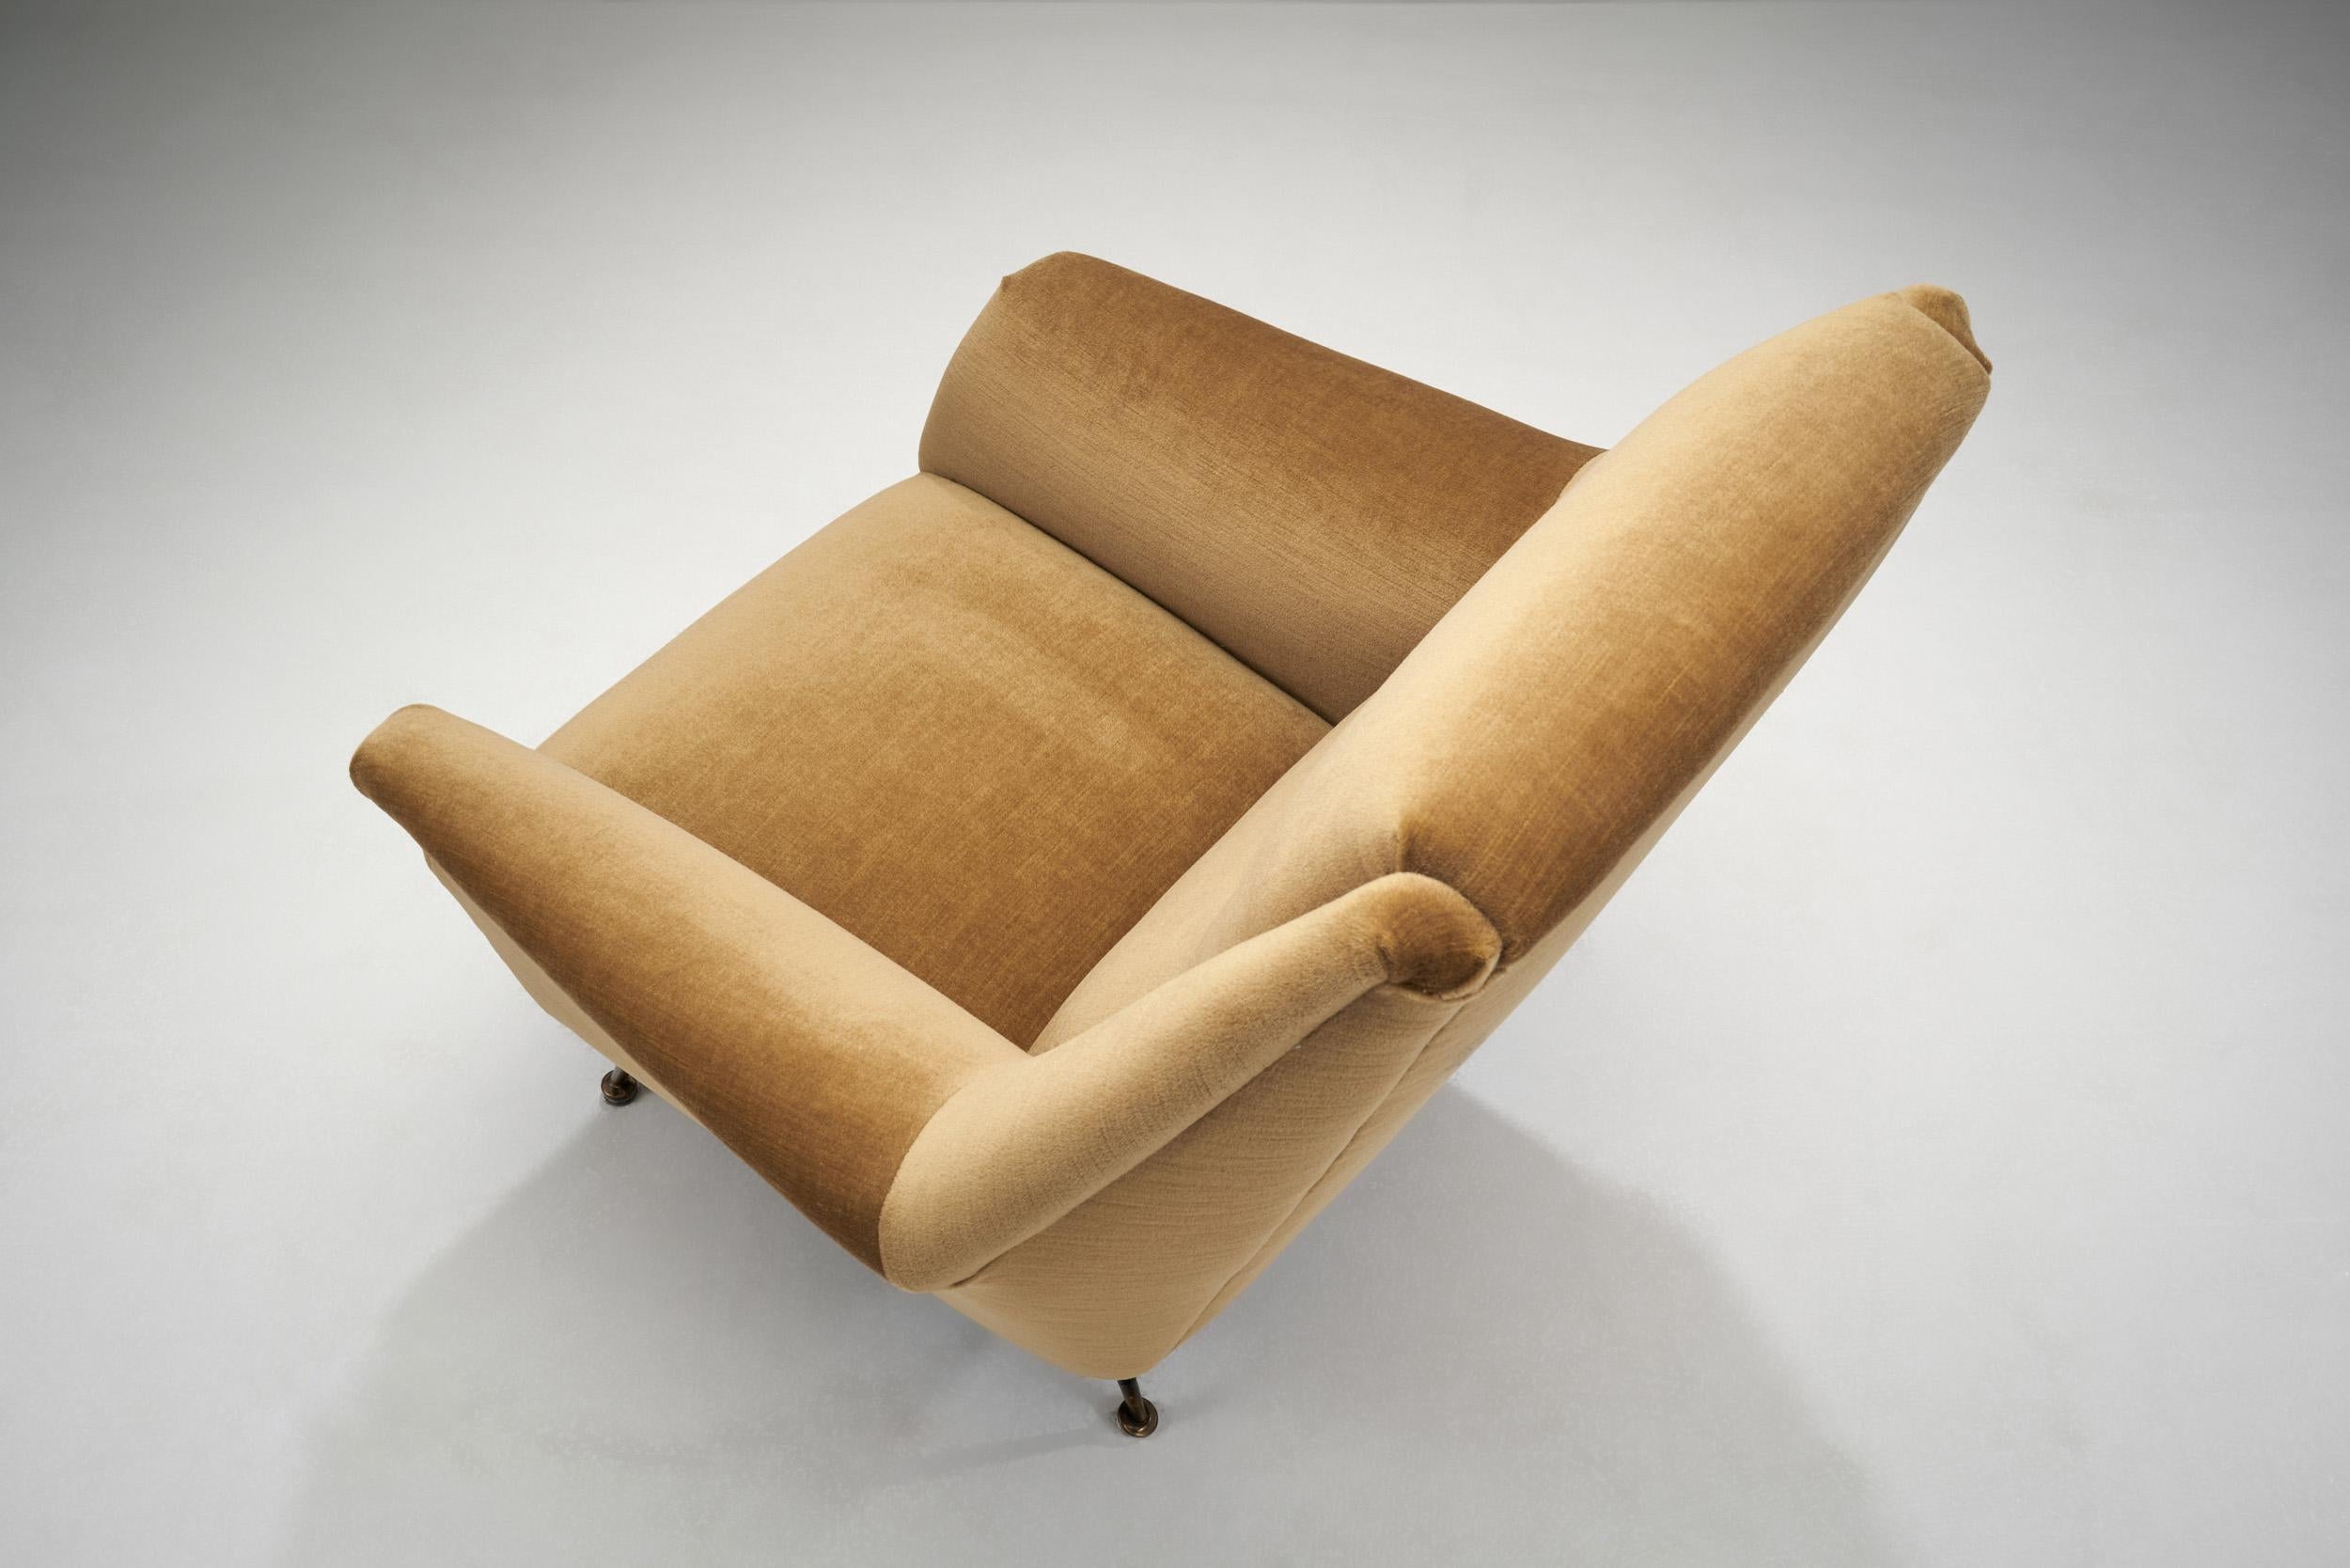 French Upholstered Lounge Chairs with Footstools, France, 1960s For Sale 6